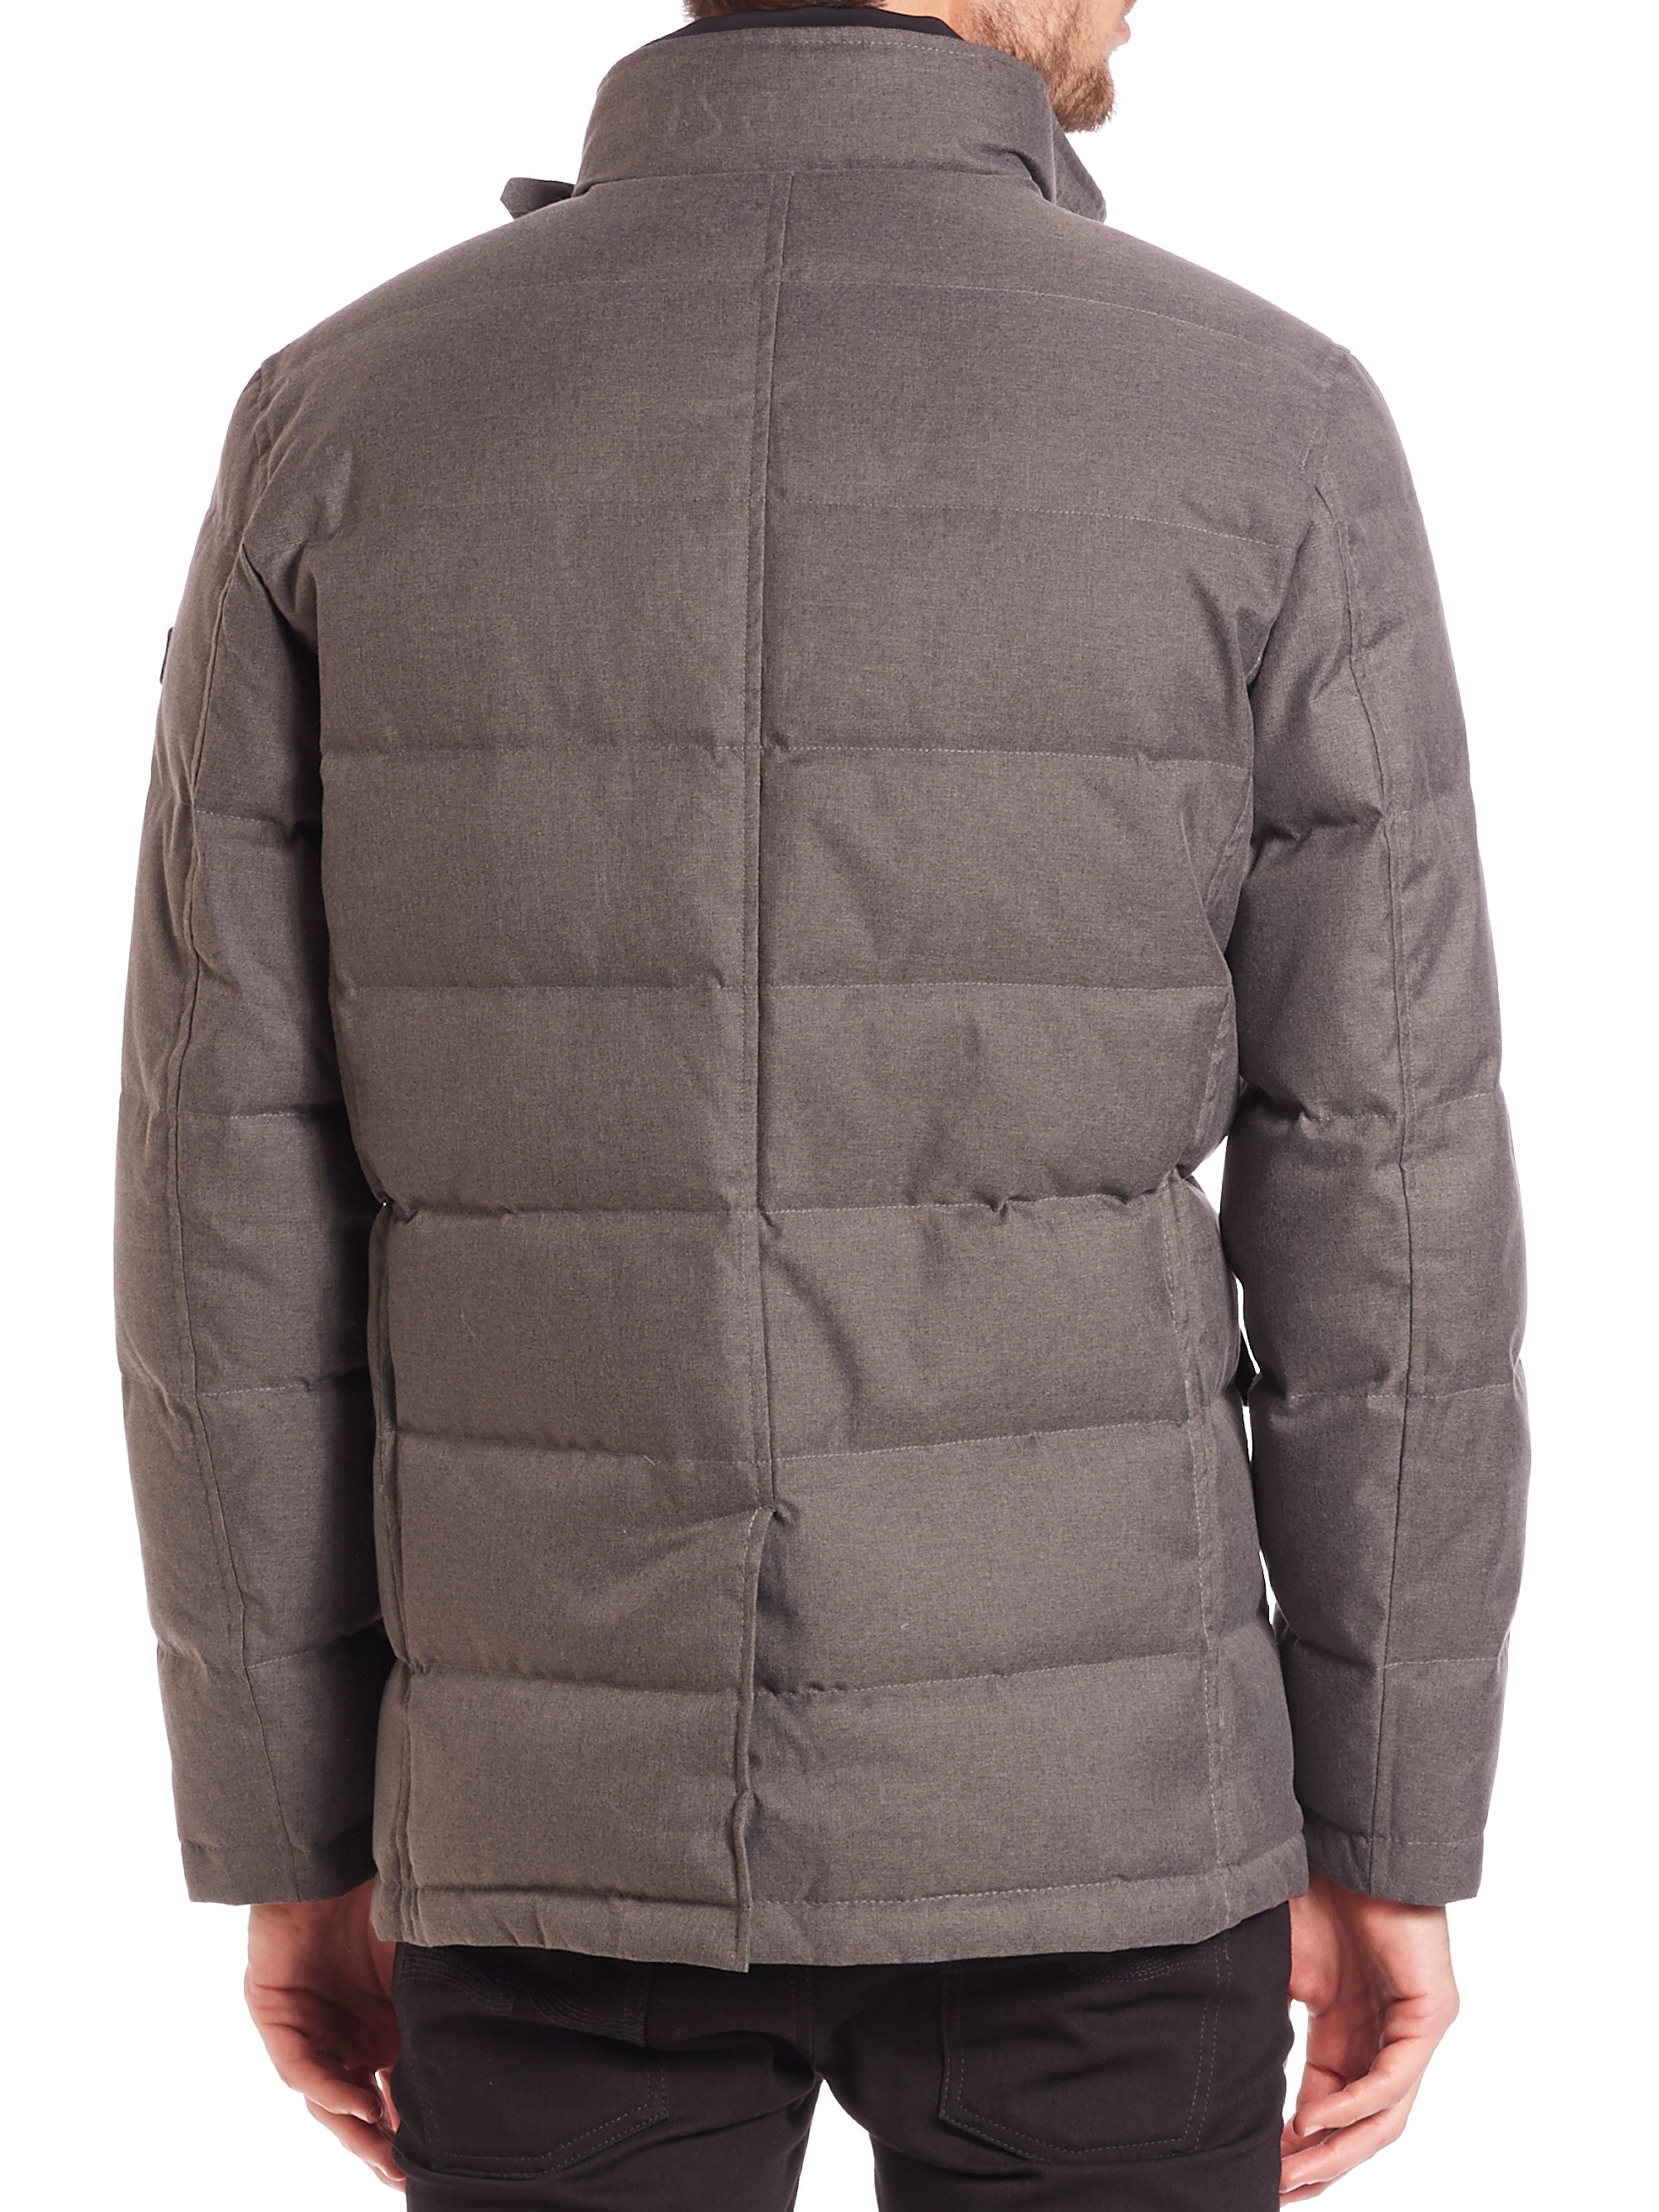 Lyst - Tumi Quilted Blazer Jacket in Gray for Men